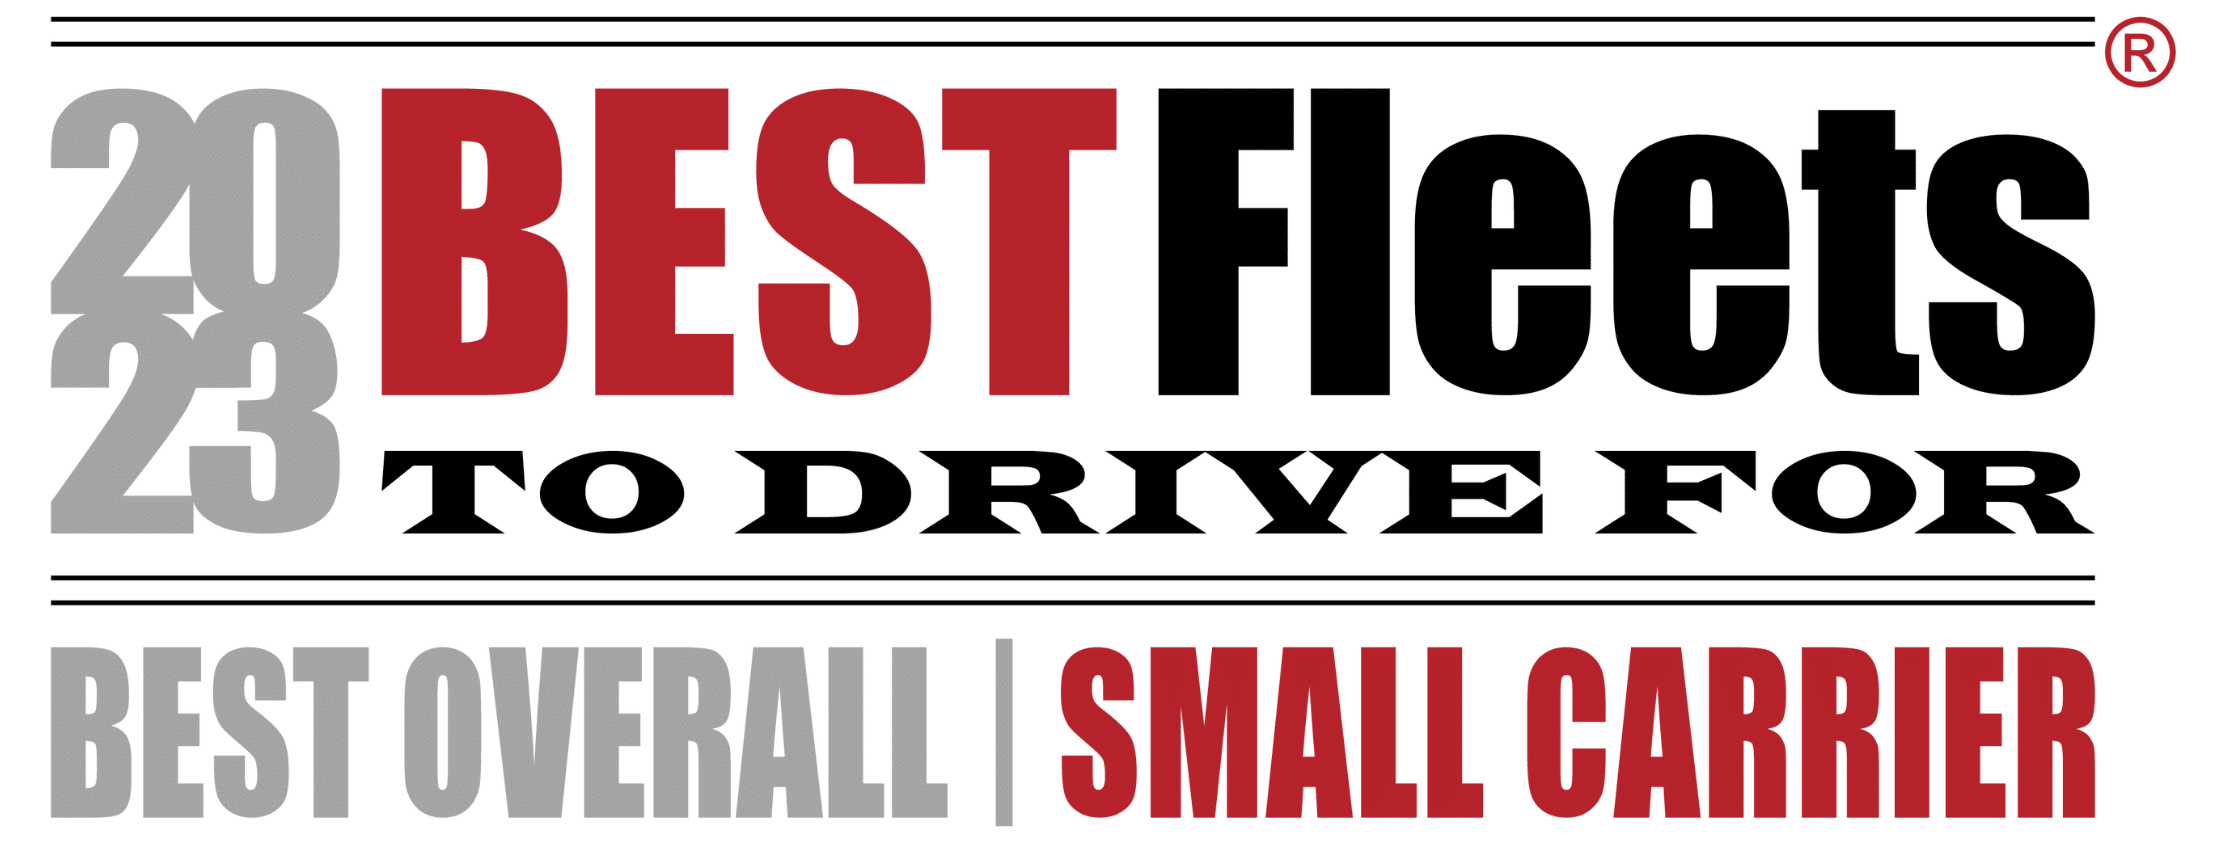 2023 best fleets to drive for, best overall in the small carrier category logo